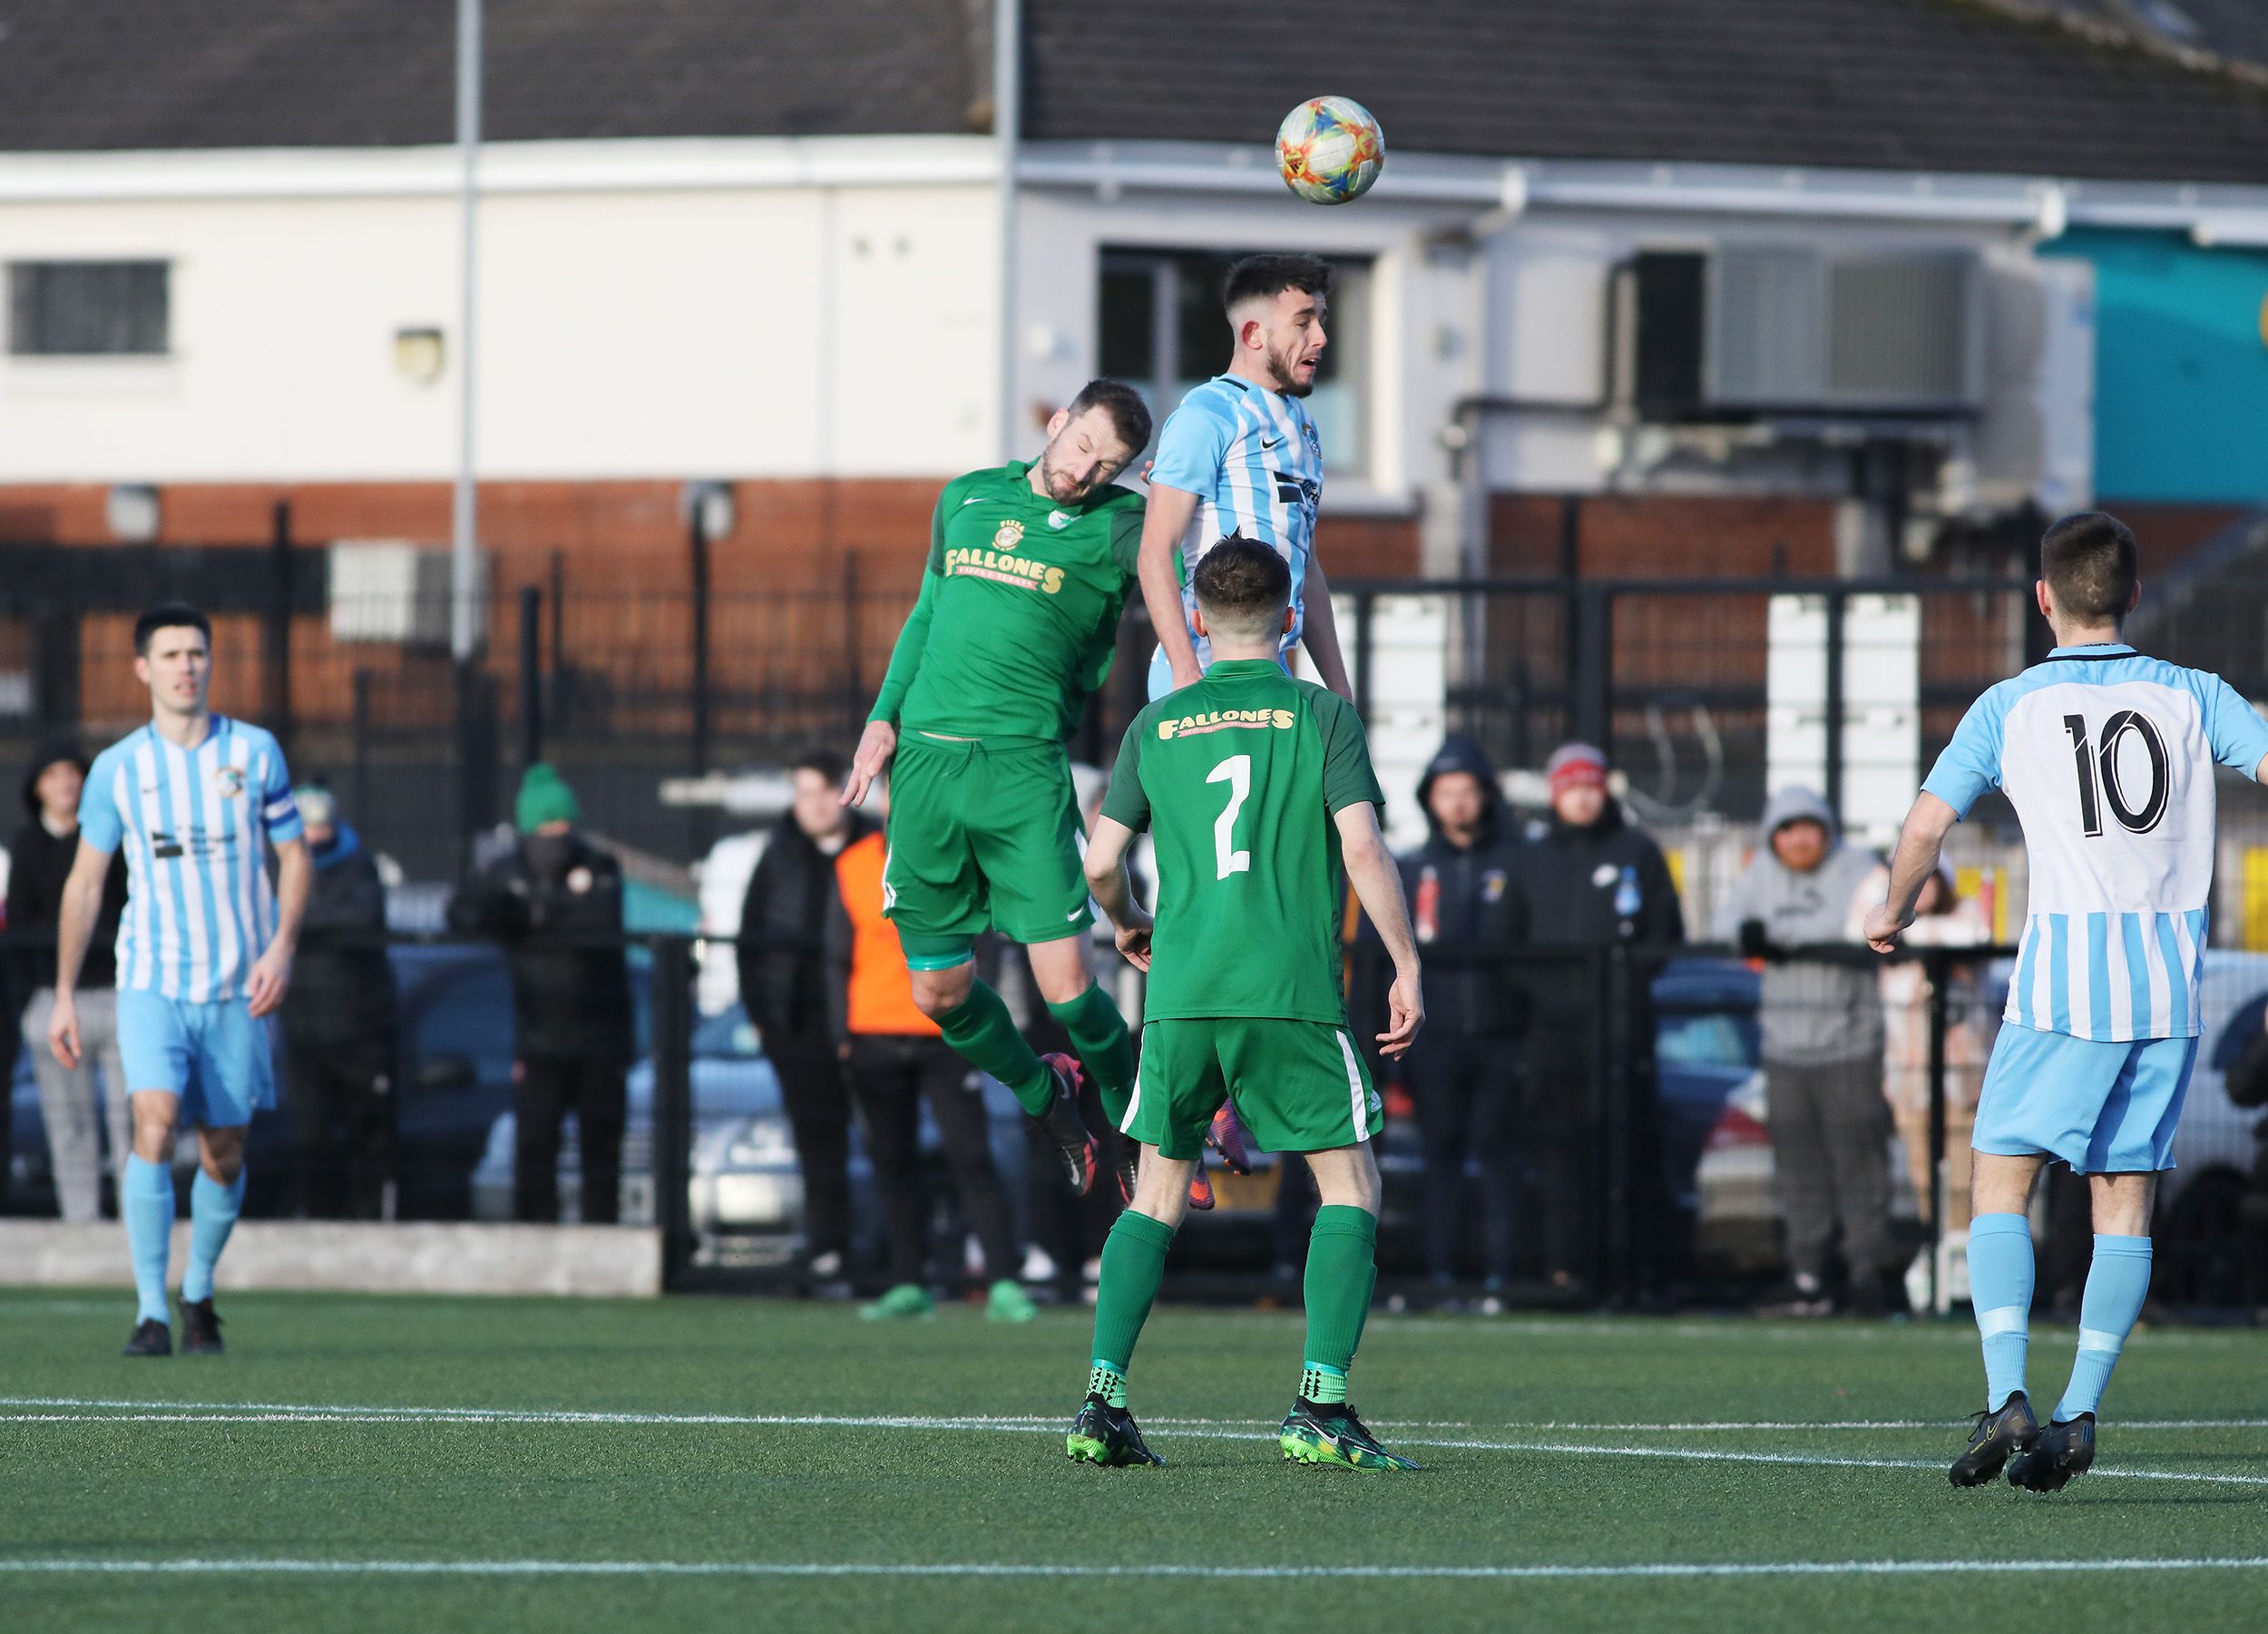 Action from Saturday\'s game at Cliftonville Playing Fields as Crumlin Star edged out Immaculata 1-0 thanks to Joe McNeill\'s first half goal 